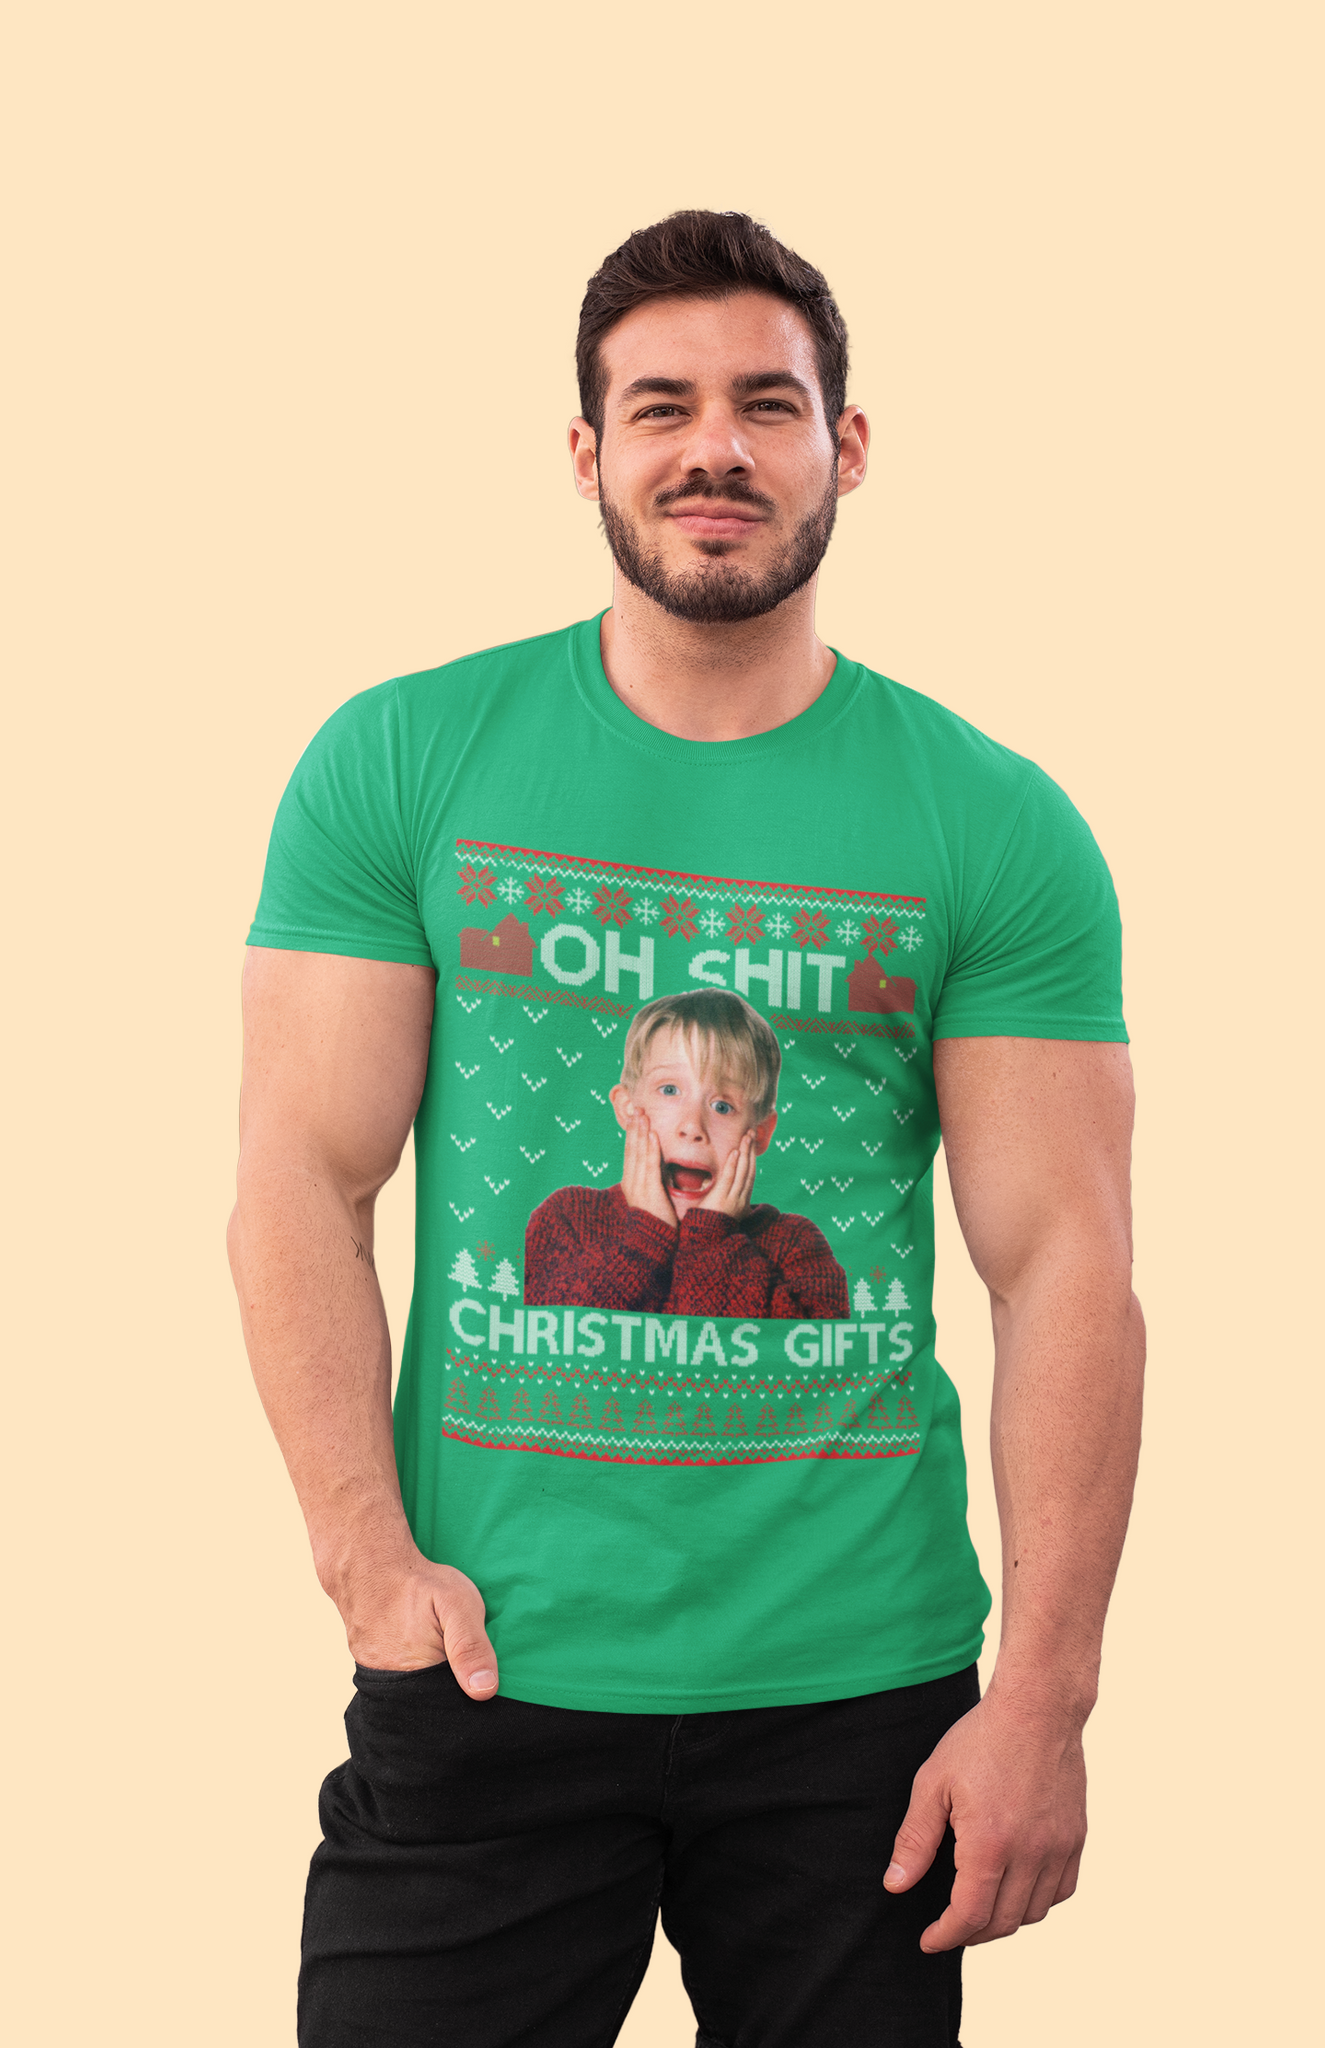 Home Alone Ugly Sweater Shirt, Kevin McCallister T Shirt, Oh Shit Christmas Gifts Tshirt, Christmas Gifts